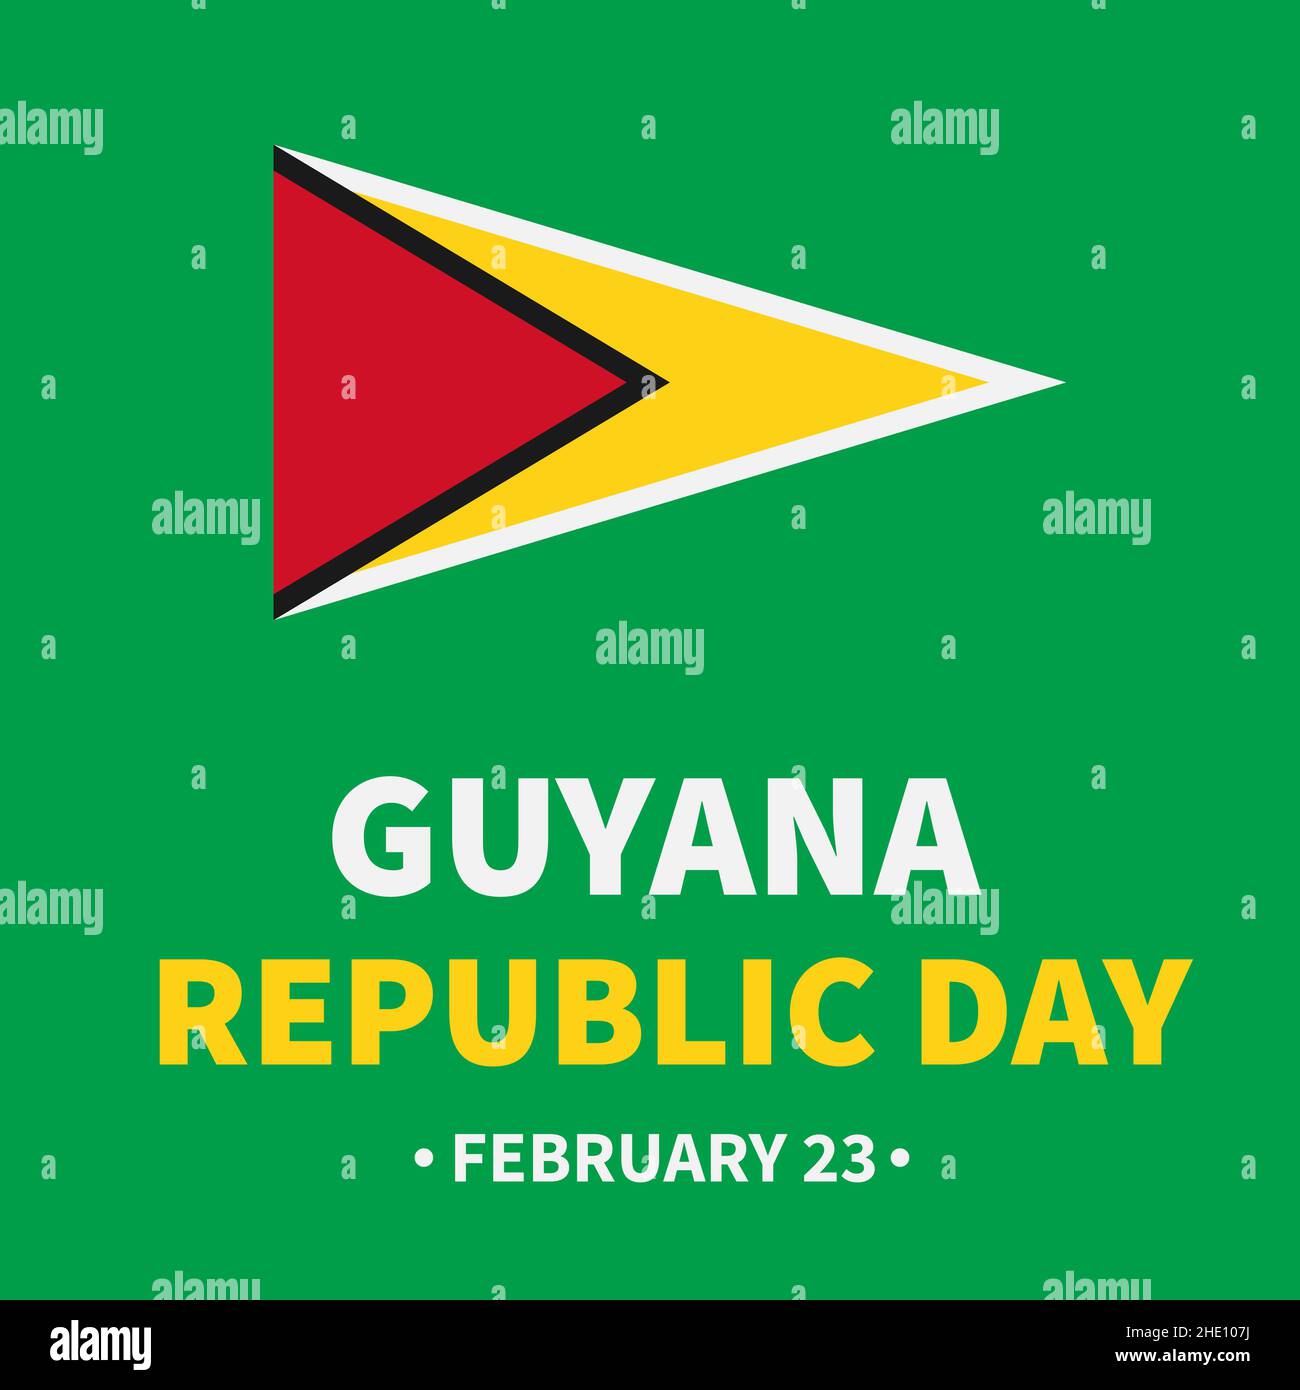 Guyana Republic Day banner. National holiday celebrated on February 23. Vector template for poster, greeting card, flyer, etc. Stock Vector